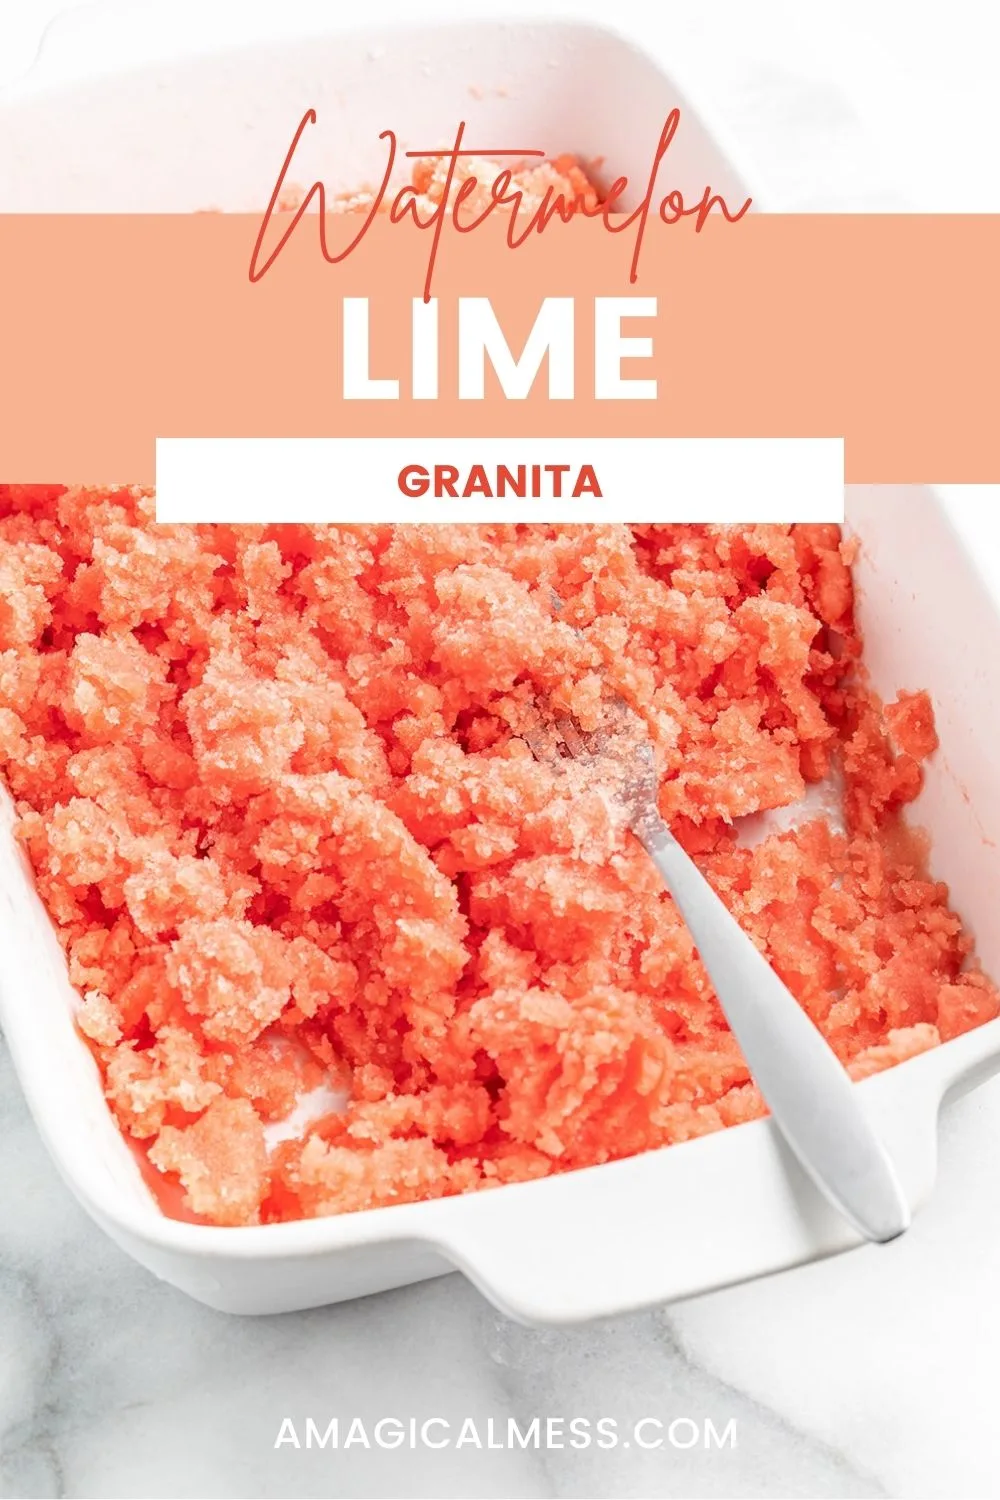 Tray of watermelon lime granita with a fork in it.